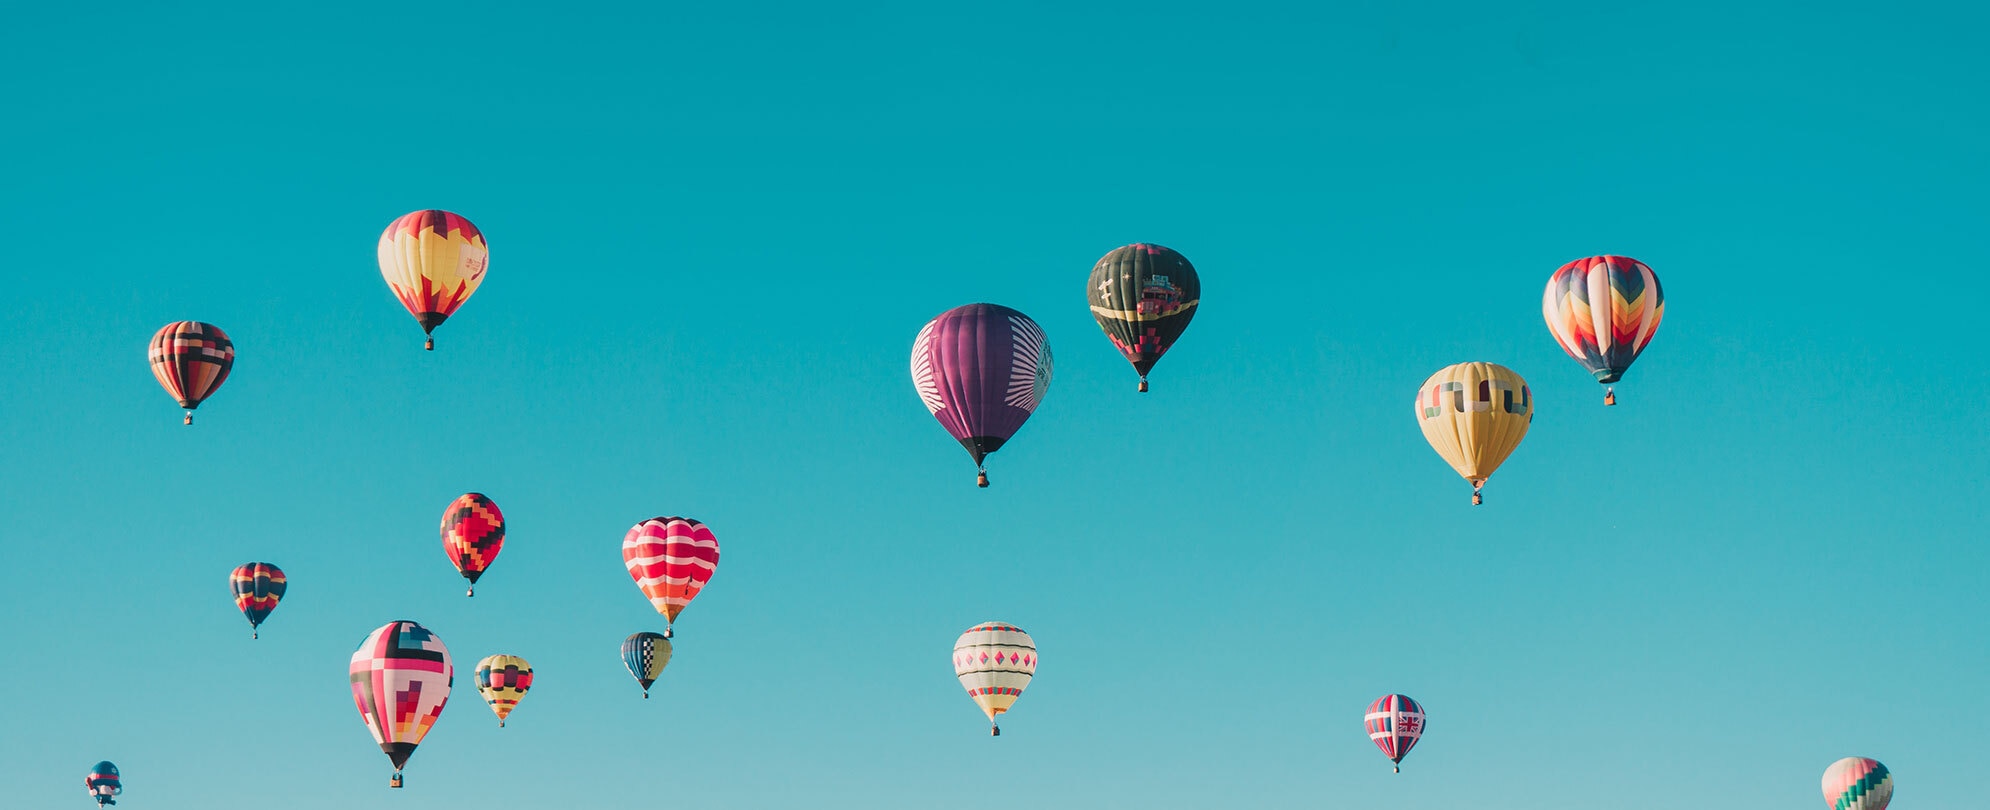 Bright blue sky with different color hot air balloons